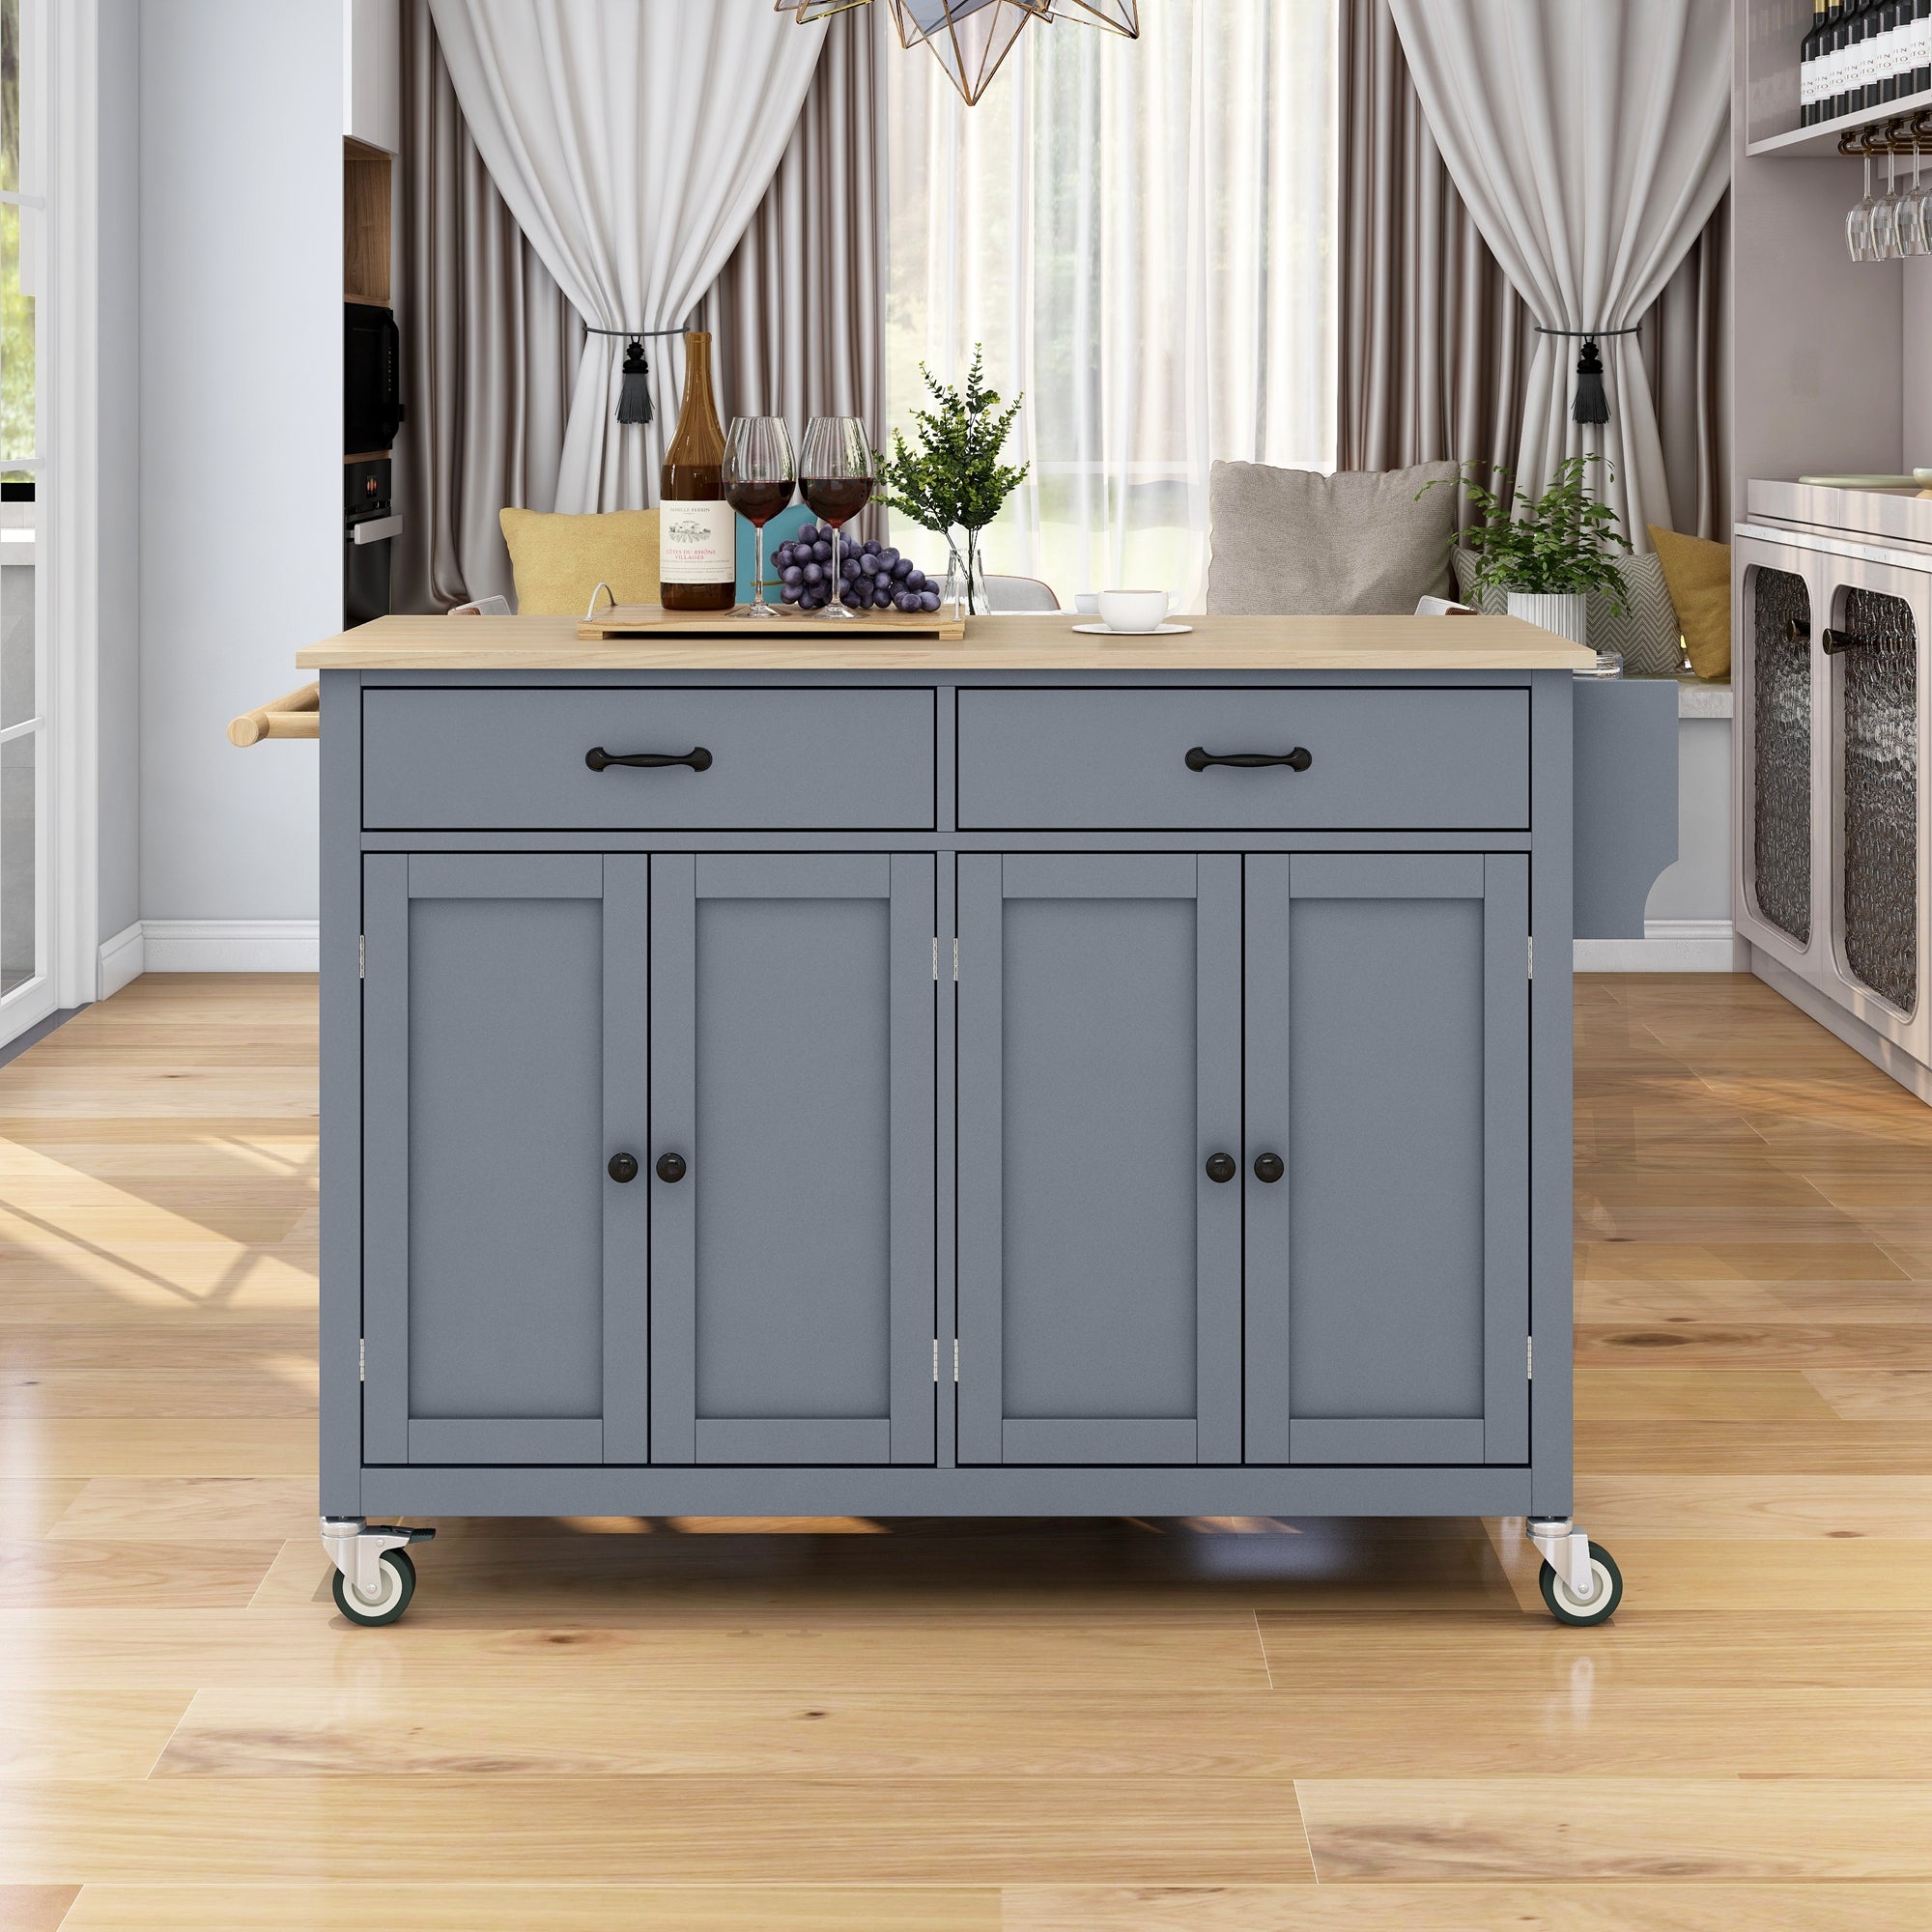 Kitchen Island on Wheels， Zarler Kitchen Island Cart with Solid Wood Top Utility Rolling Cart Trolley， GrayBlue